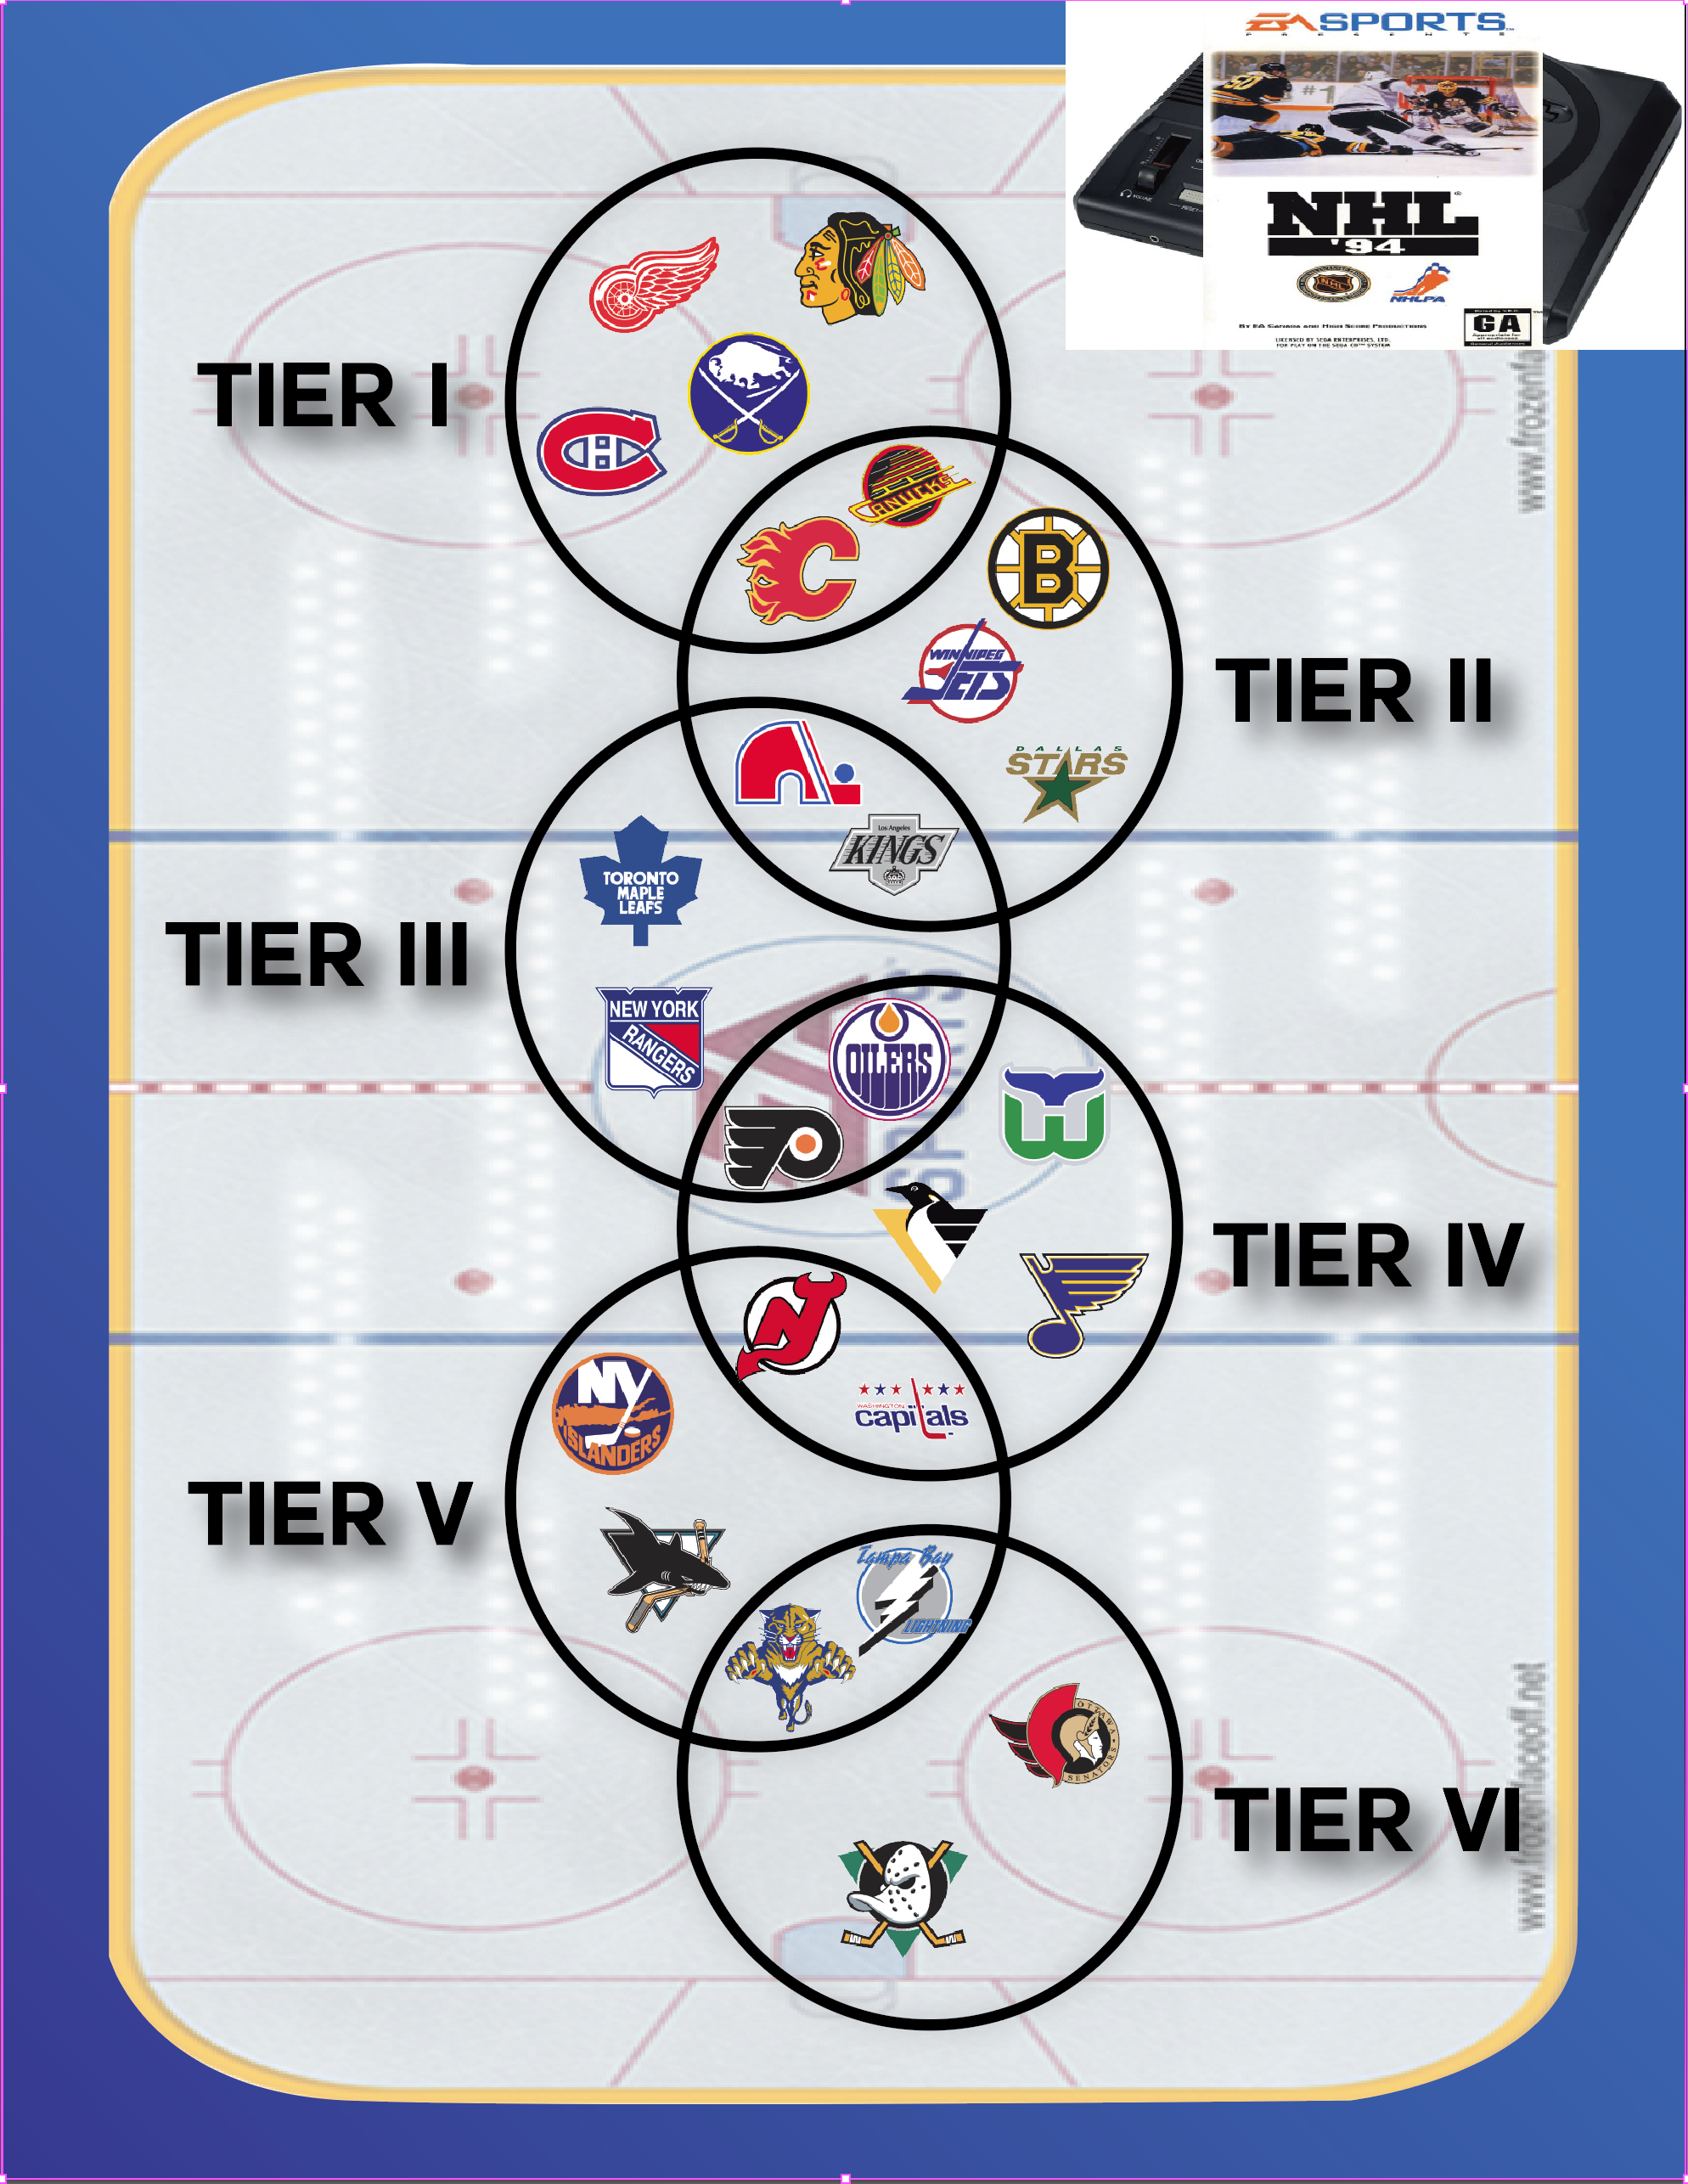 NHL video games RANKED - my tier list (link in description) 